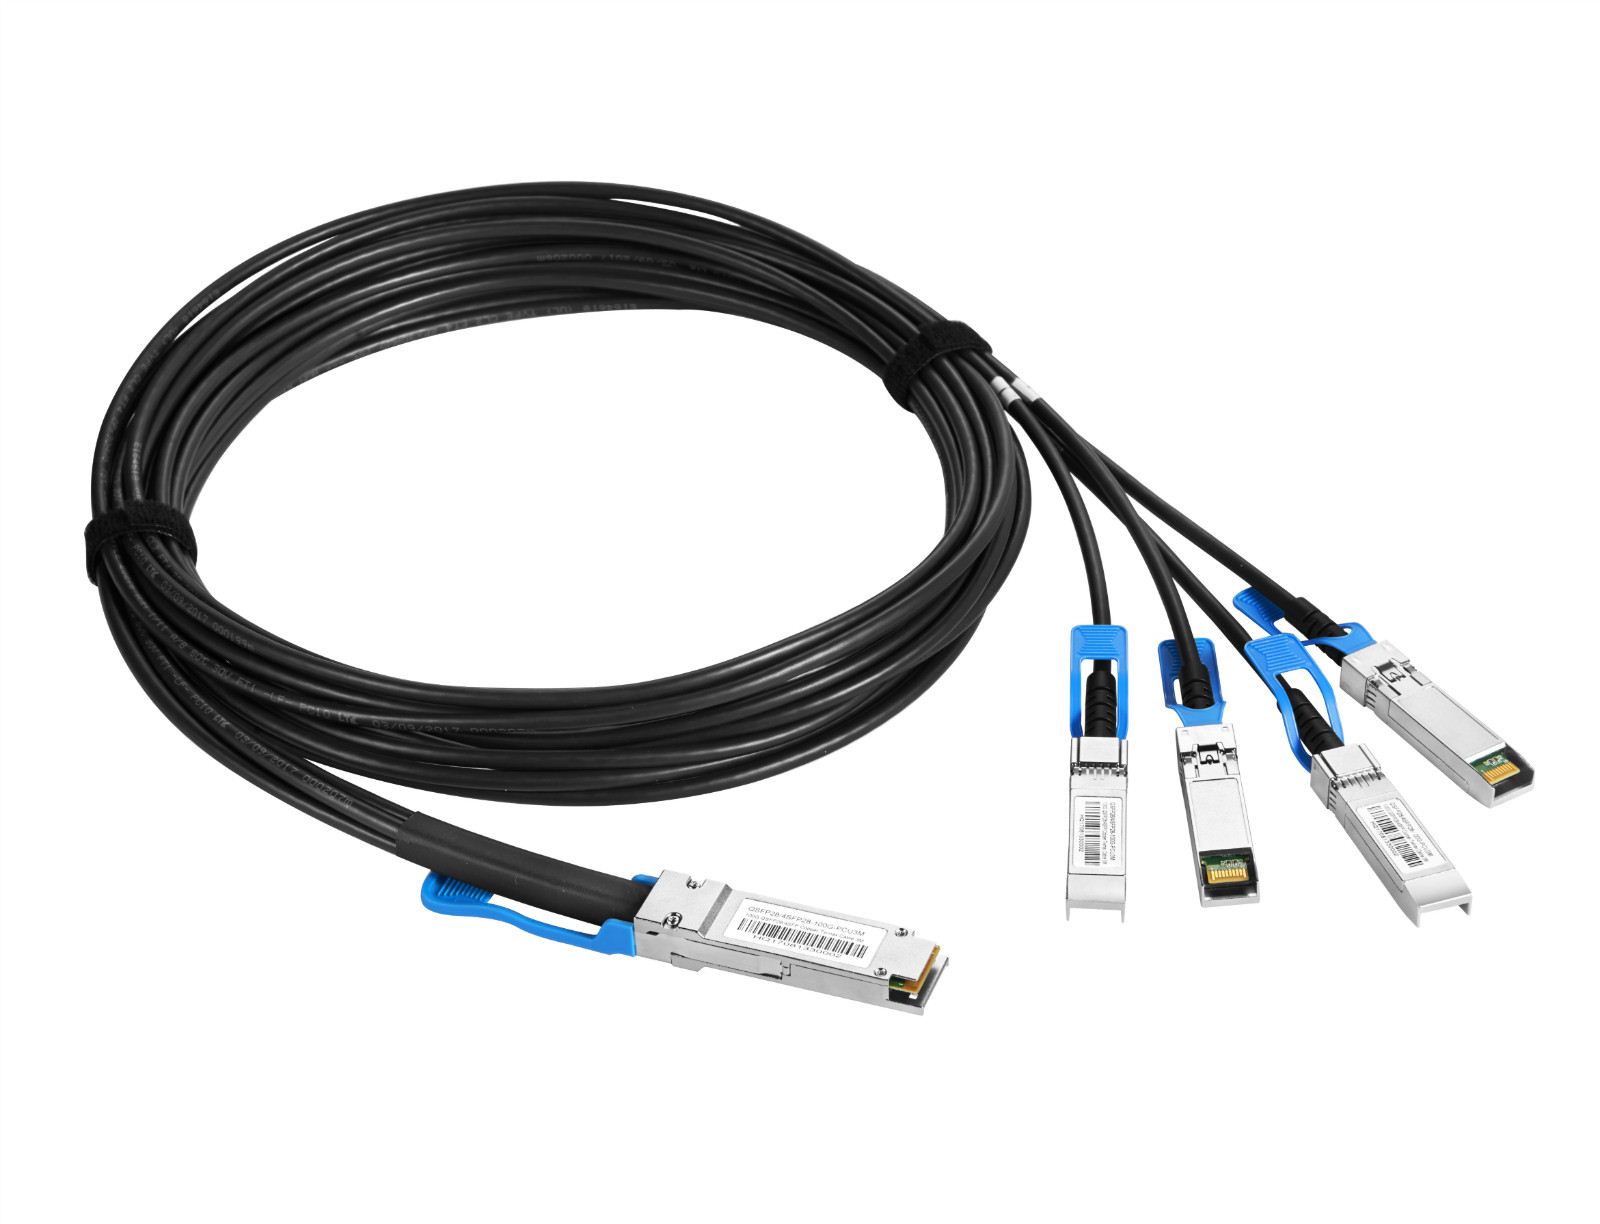 56G QSFP DAC,HTD-Inforprovides one-stop service of Cable